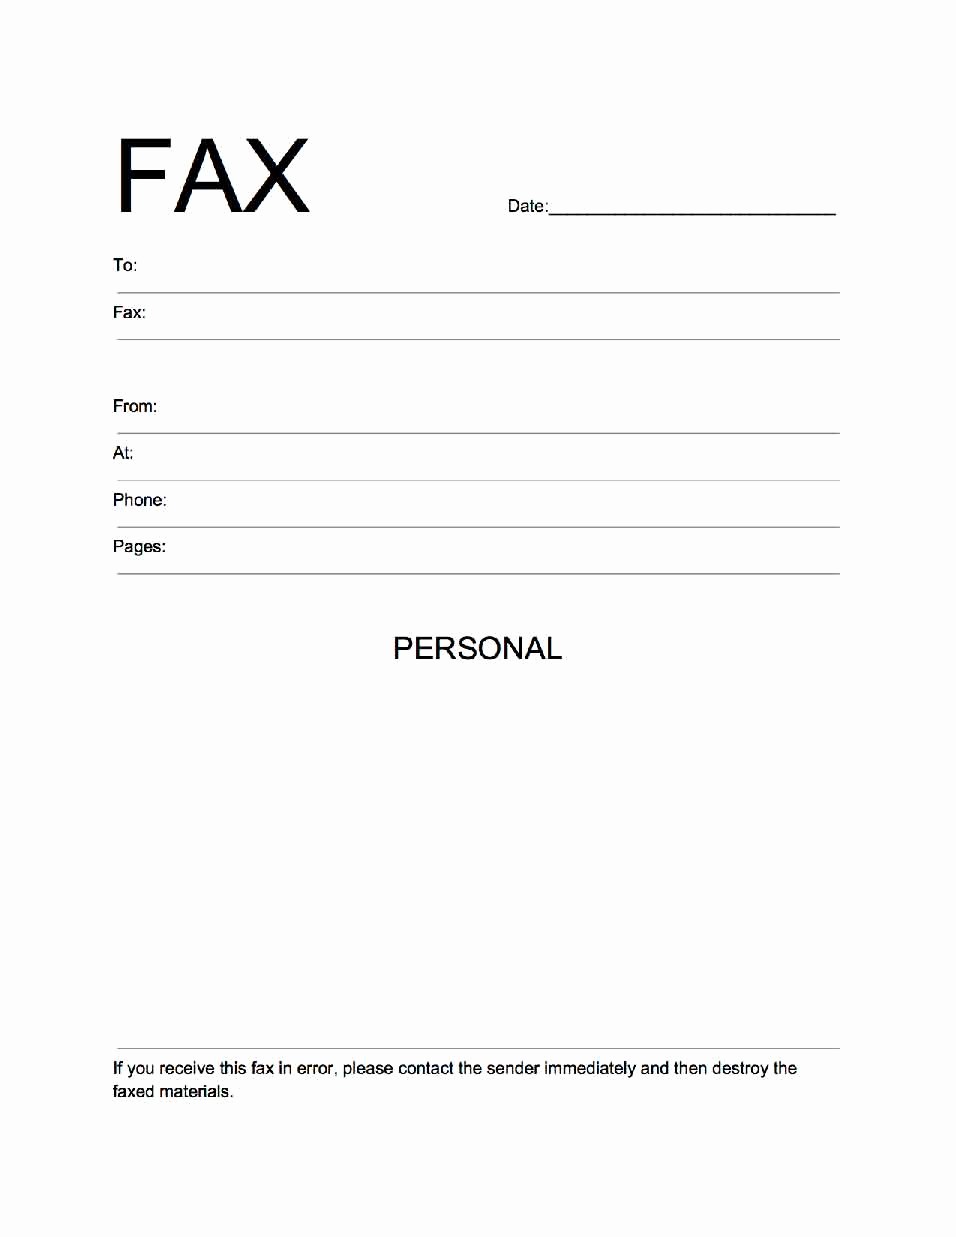 Sample Fax Cover Sheets Template Fresh Free Fax Cover Sheet Template Download